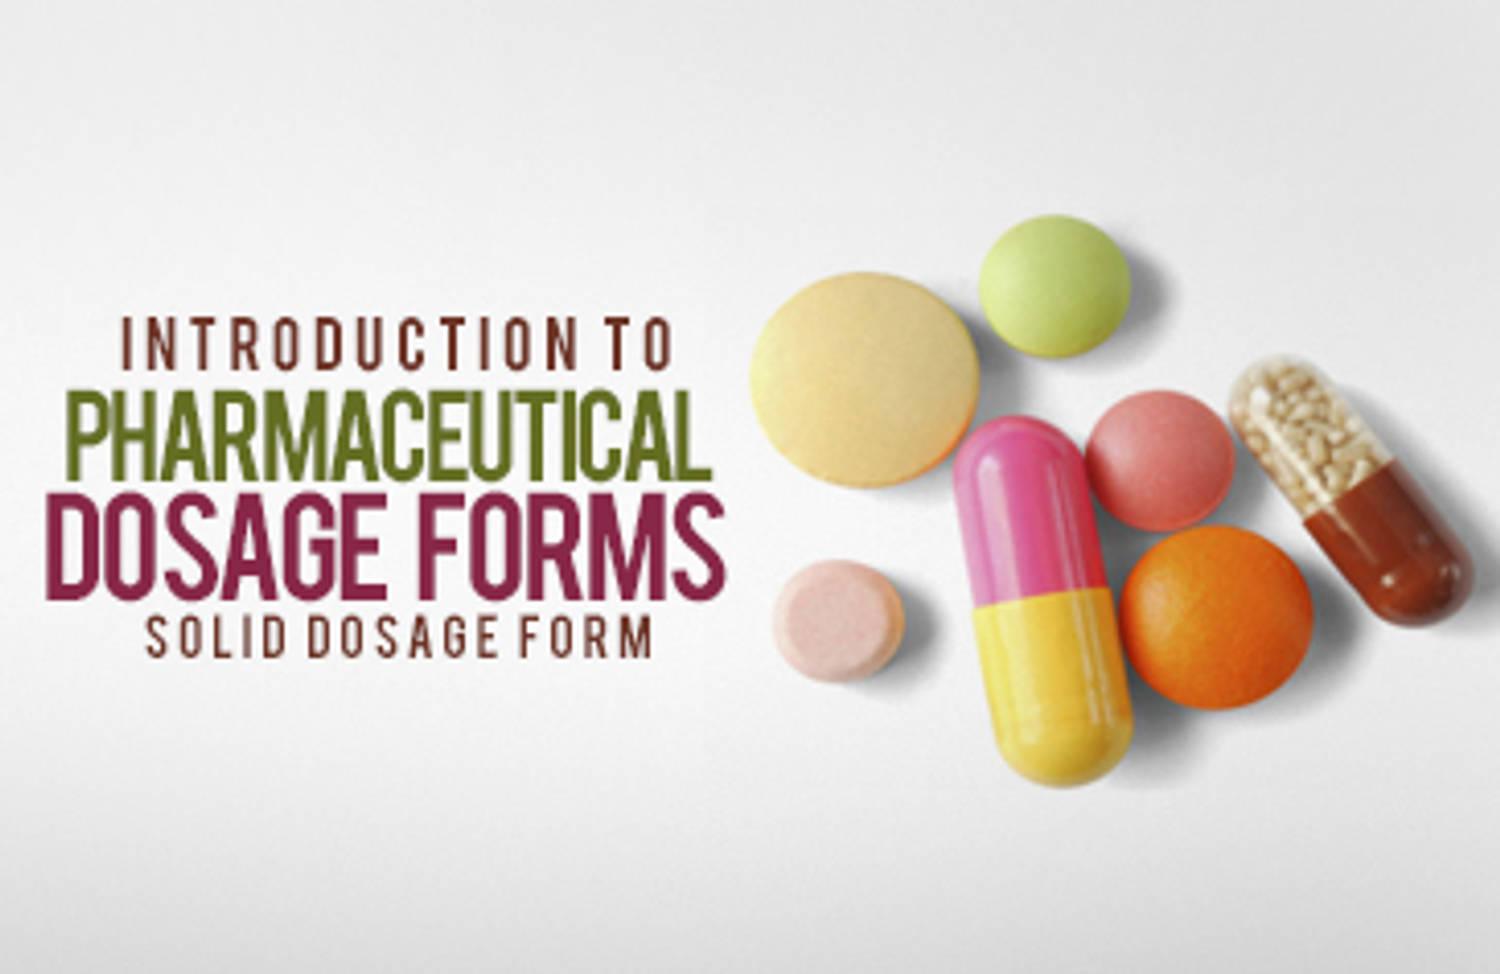 Introduction to Pharmaceutical Dosage Forms - Solid Dosage Form